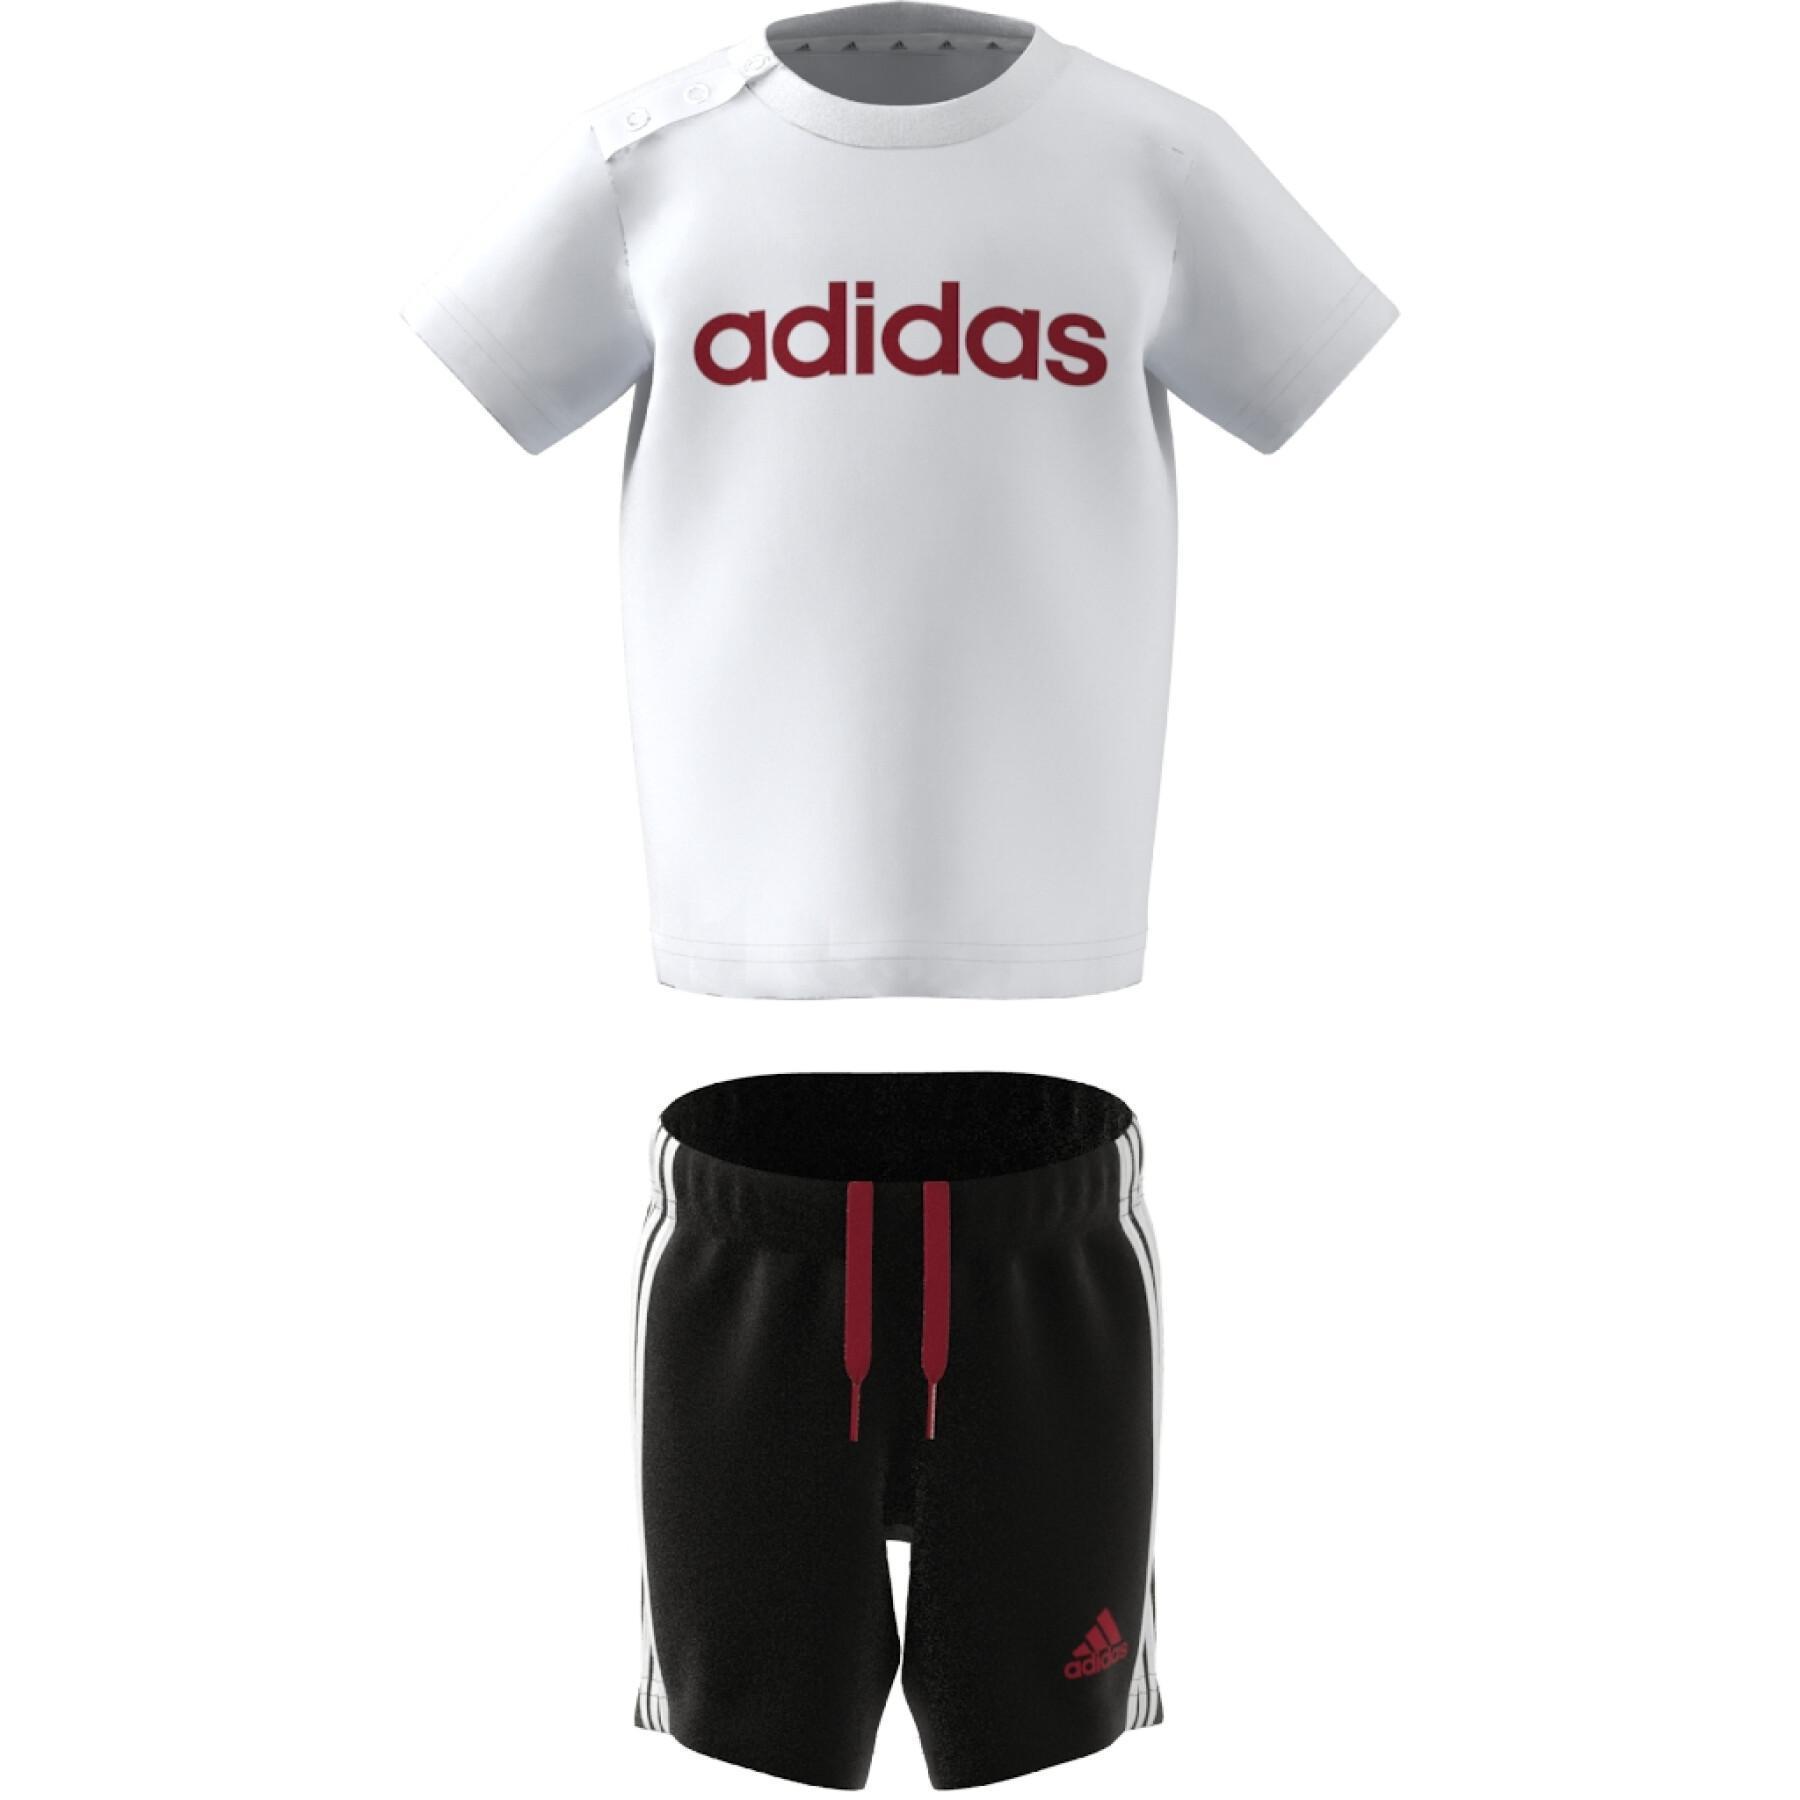 Organic cotton adidas and - - Essentials Lineage t-shirt - Brands Lifestyle 3-Stripes shorts adidas set